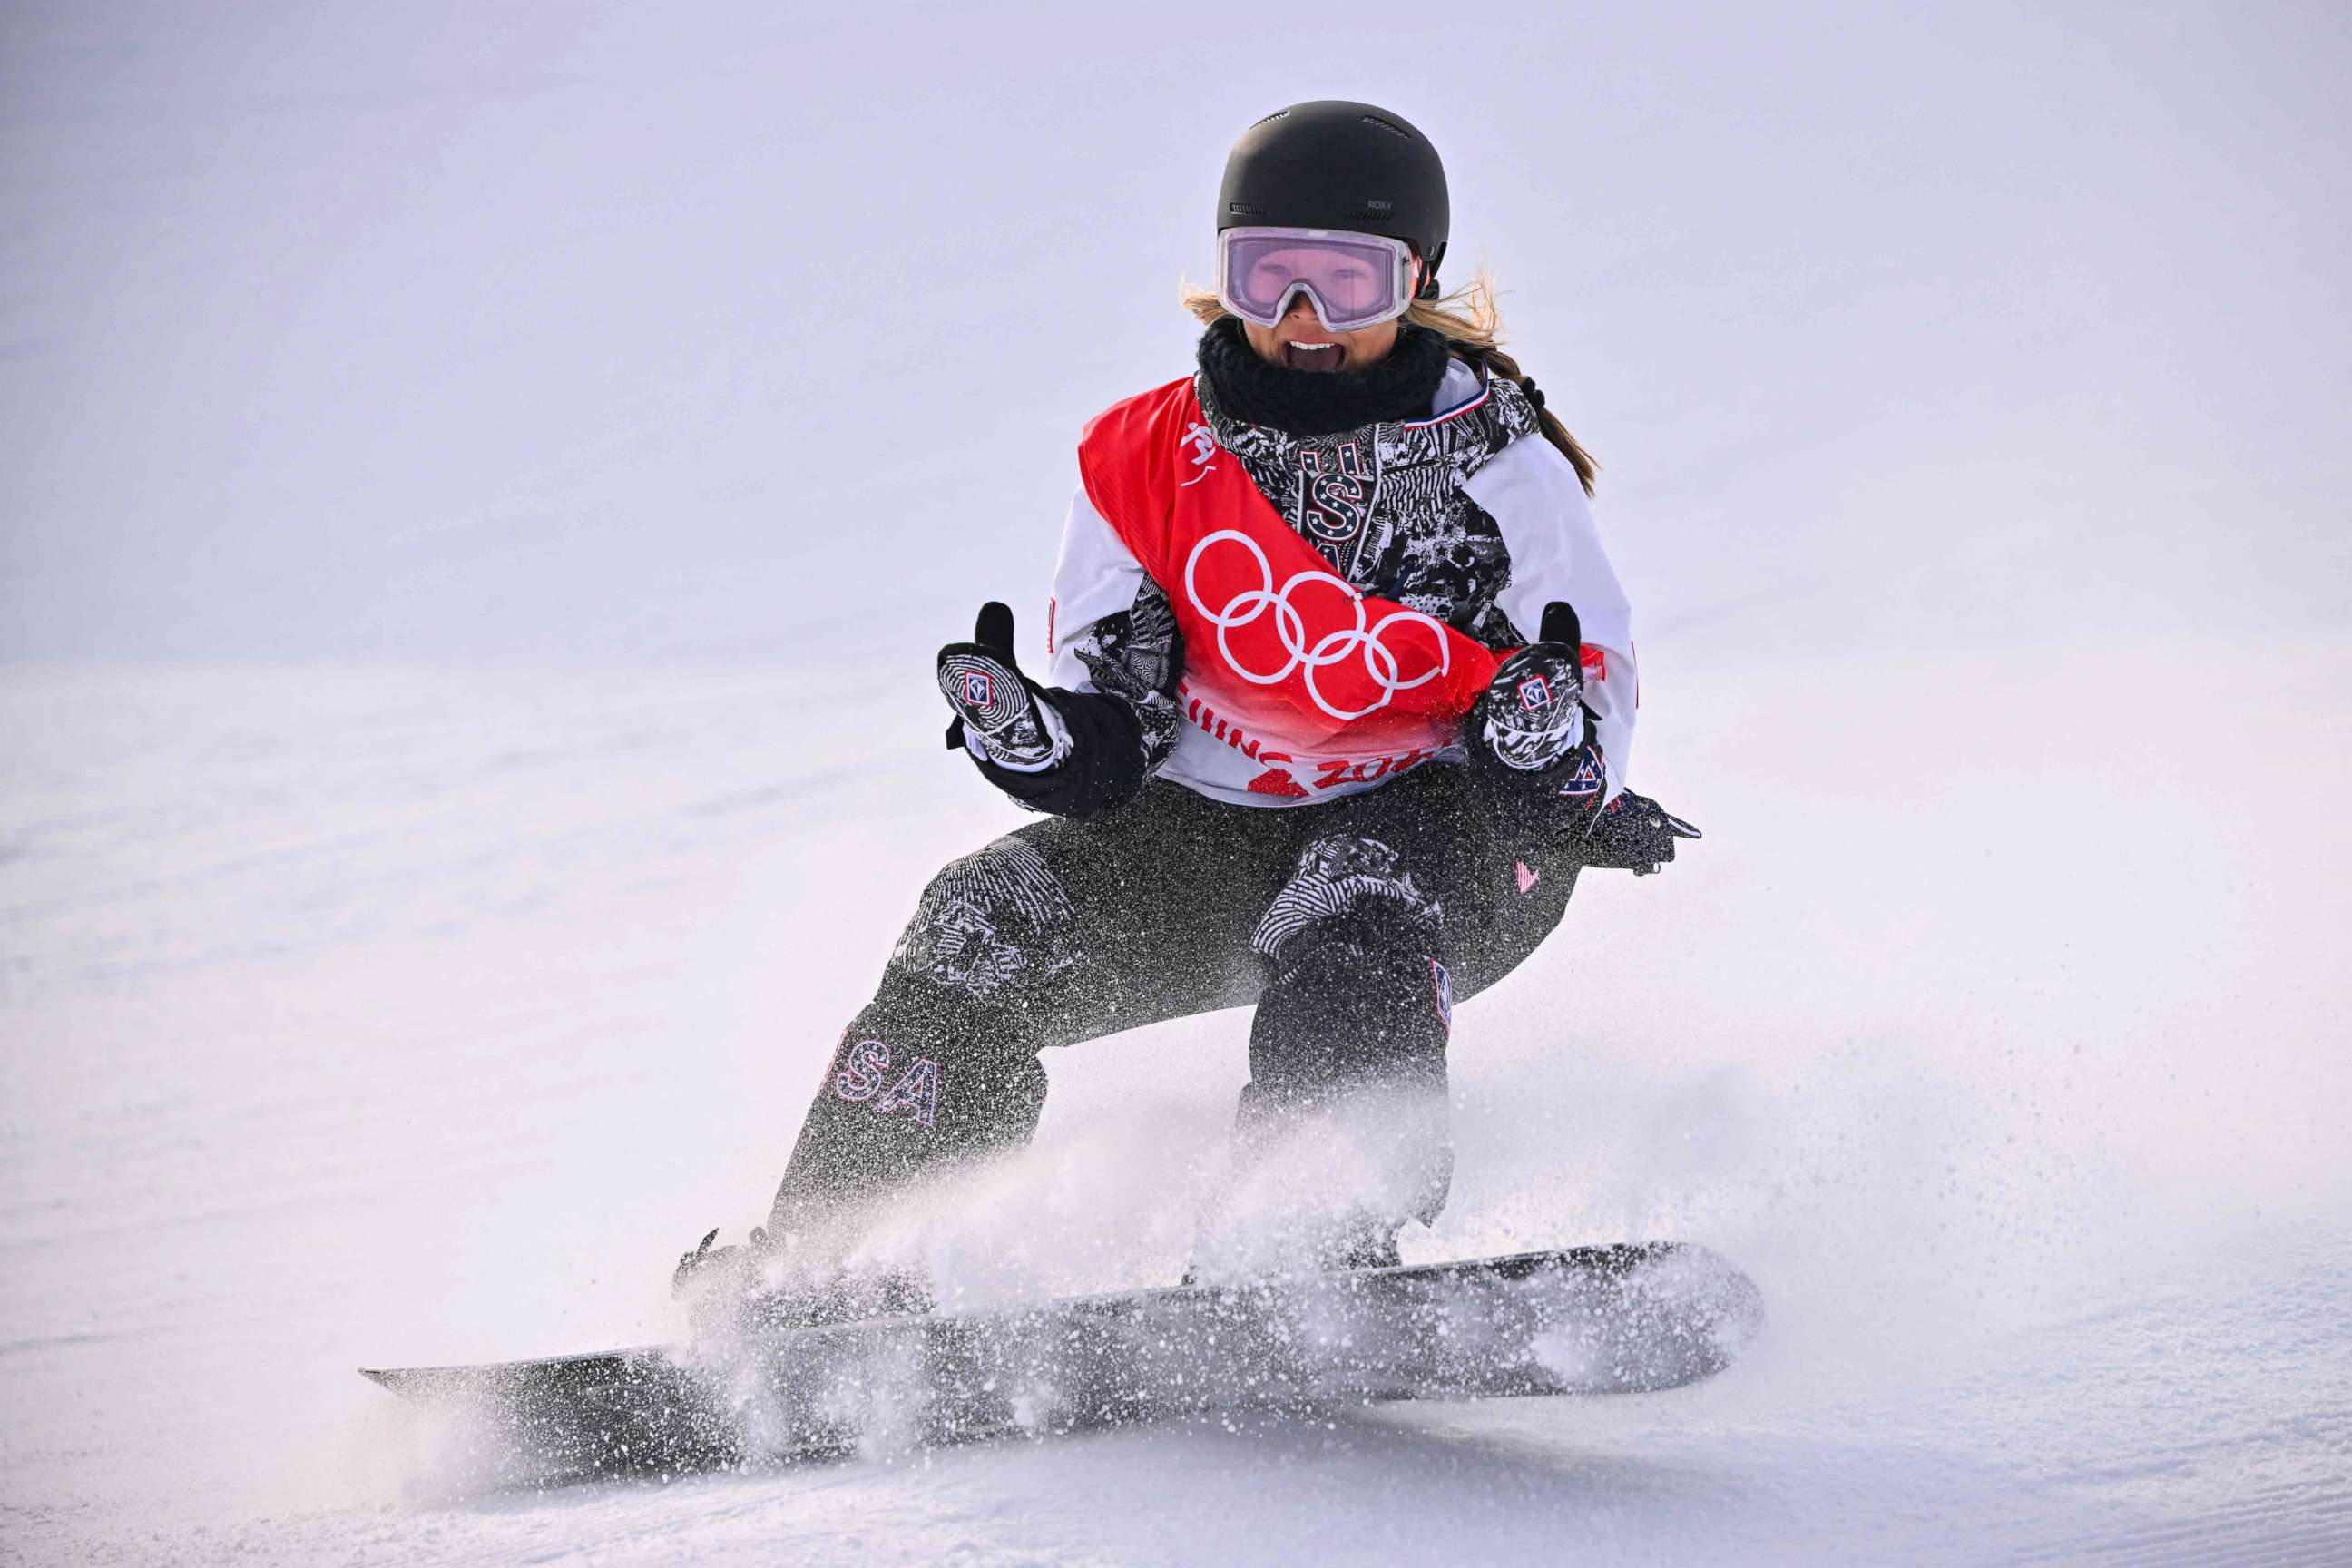 Chloe Kim cruises to 2nd straight Olympic gold in Beijing